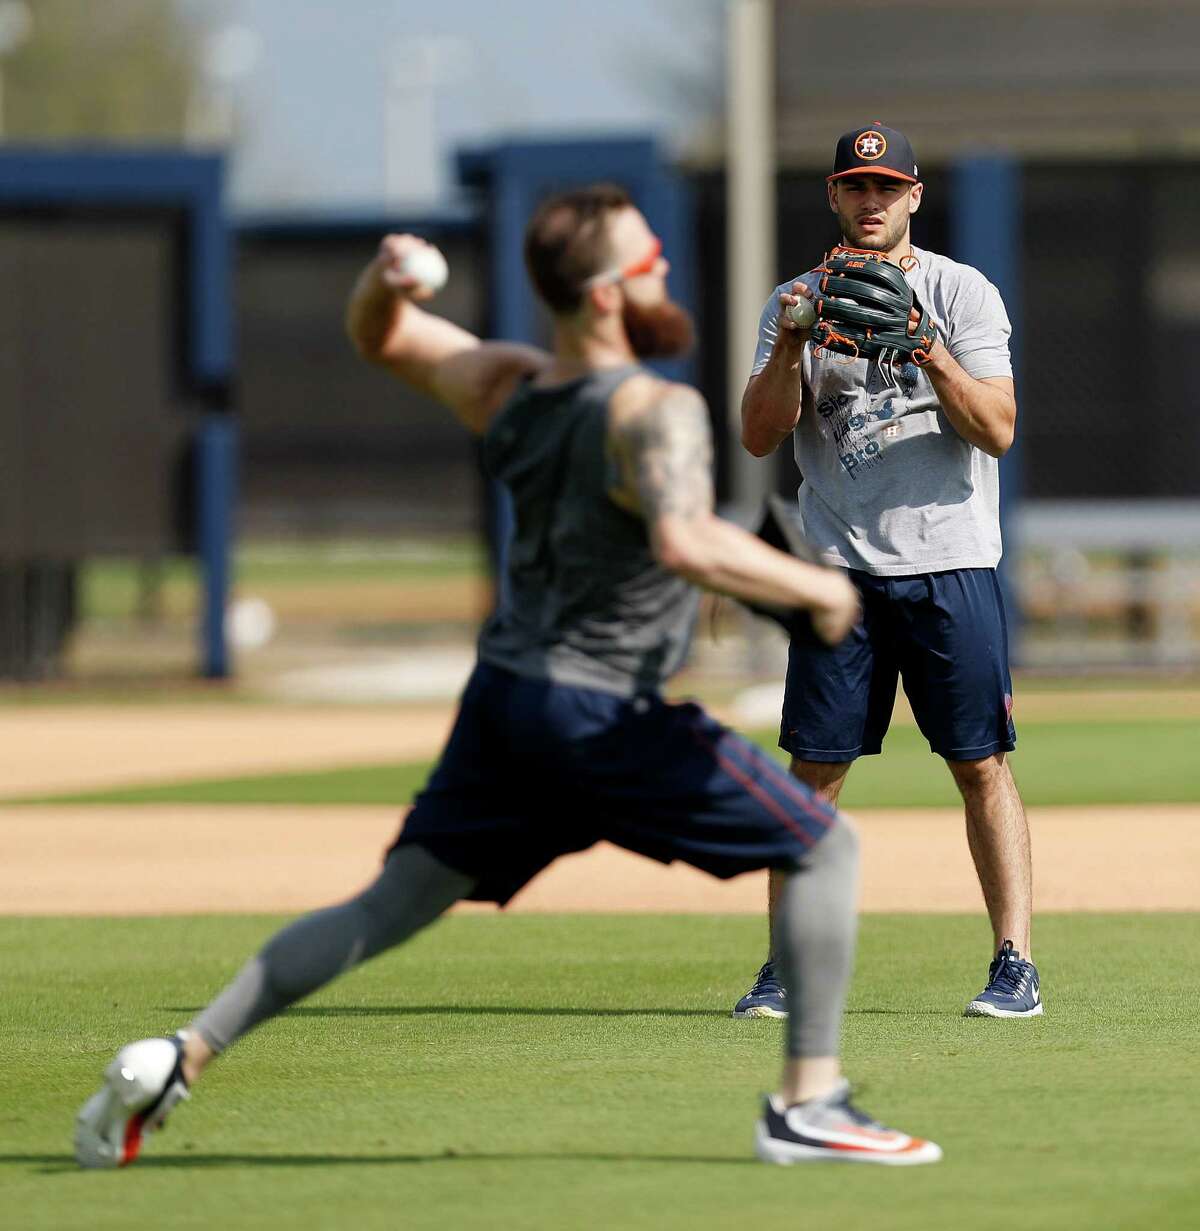 Houston Astros starting pitcher Lance McCullers and Dallas Keuchel throw during Astros pitchers and catchers report day at the Astros new spring training facility, The Ballpark of the Palm Beaches, in West Palm Beach, Florida, Tuesday, February 14, 2017. The Astros share the new ballpark with the Washington Nationals.